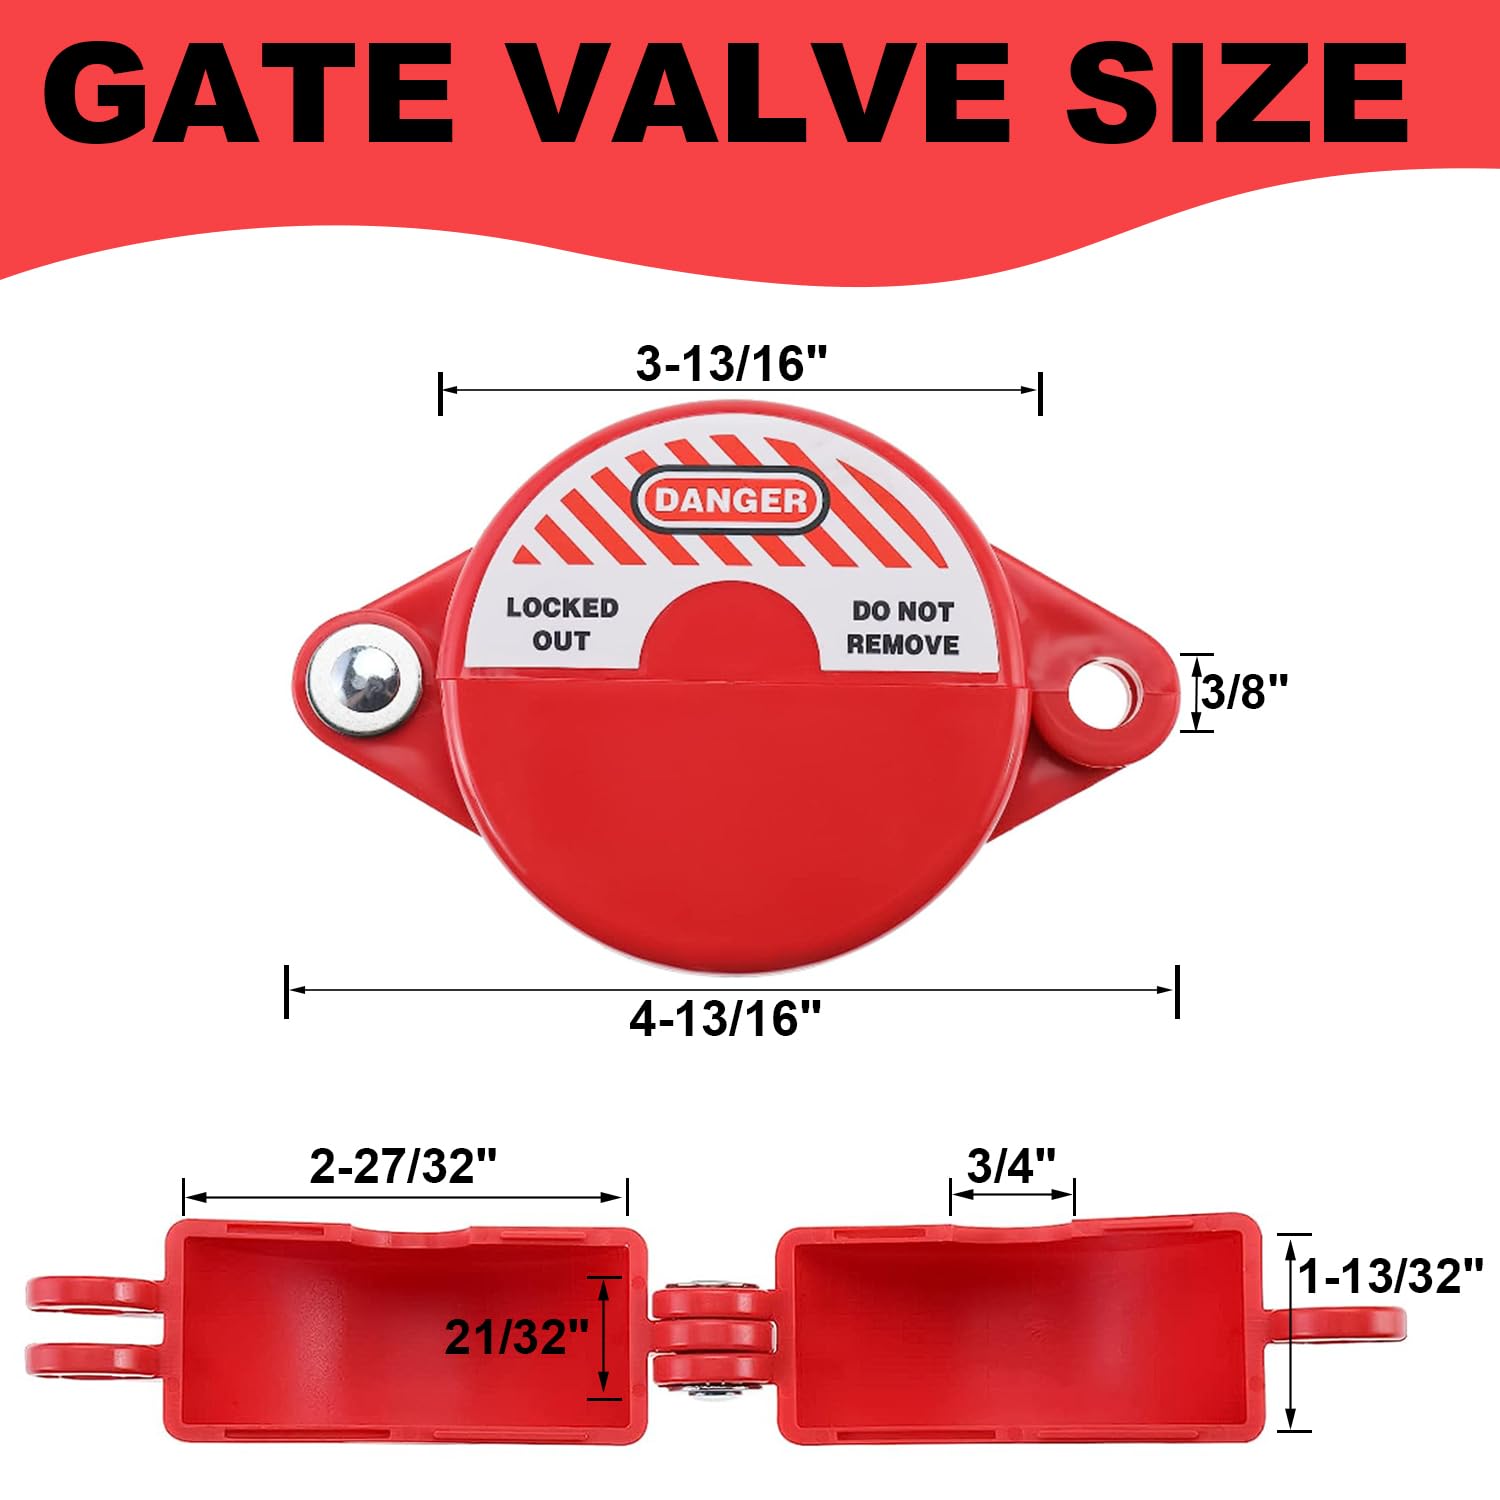 smseace 1Set Gate Valve Lockout with Safety Padlock Suited for 1 to2-1/2 Valve Handles Water Valve Lockout Device Gas Valve Lockout Hose Bib Lock for Outdoor Faucet Knob，Water Spigot，Hose Lock